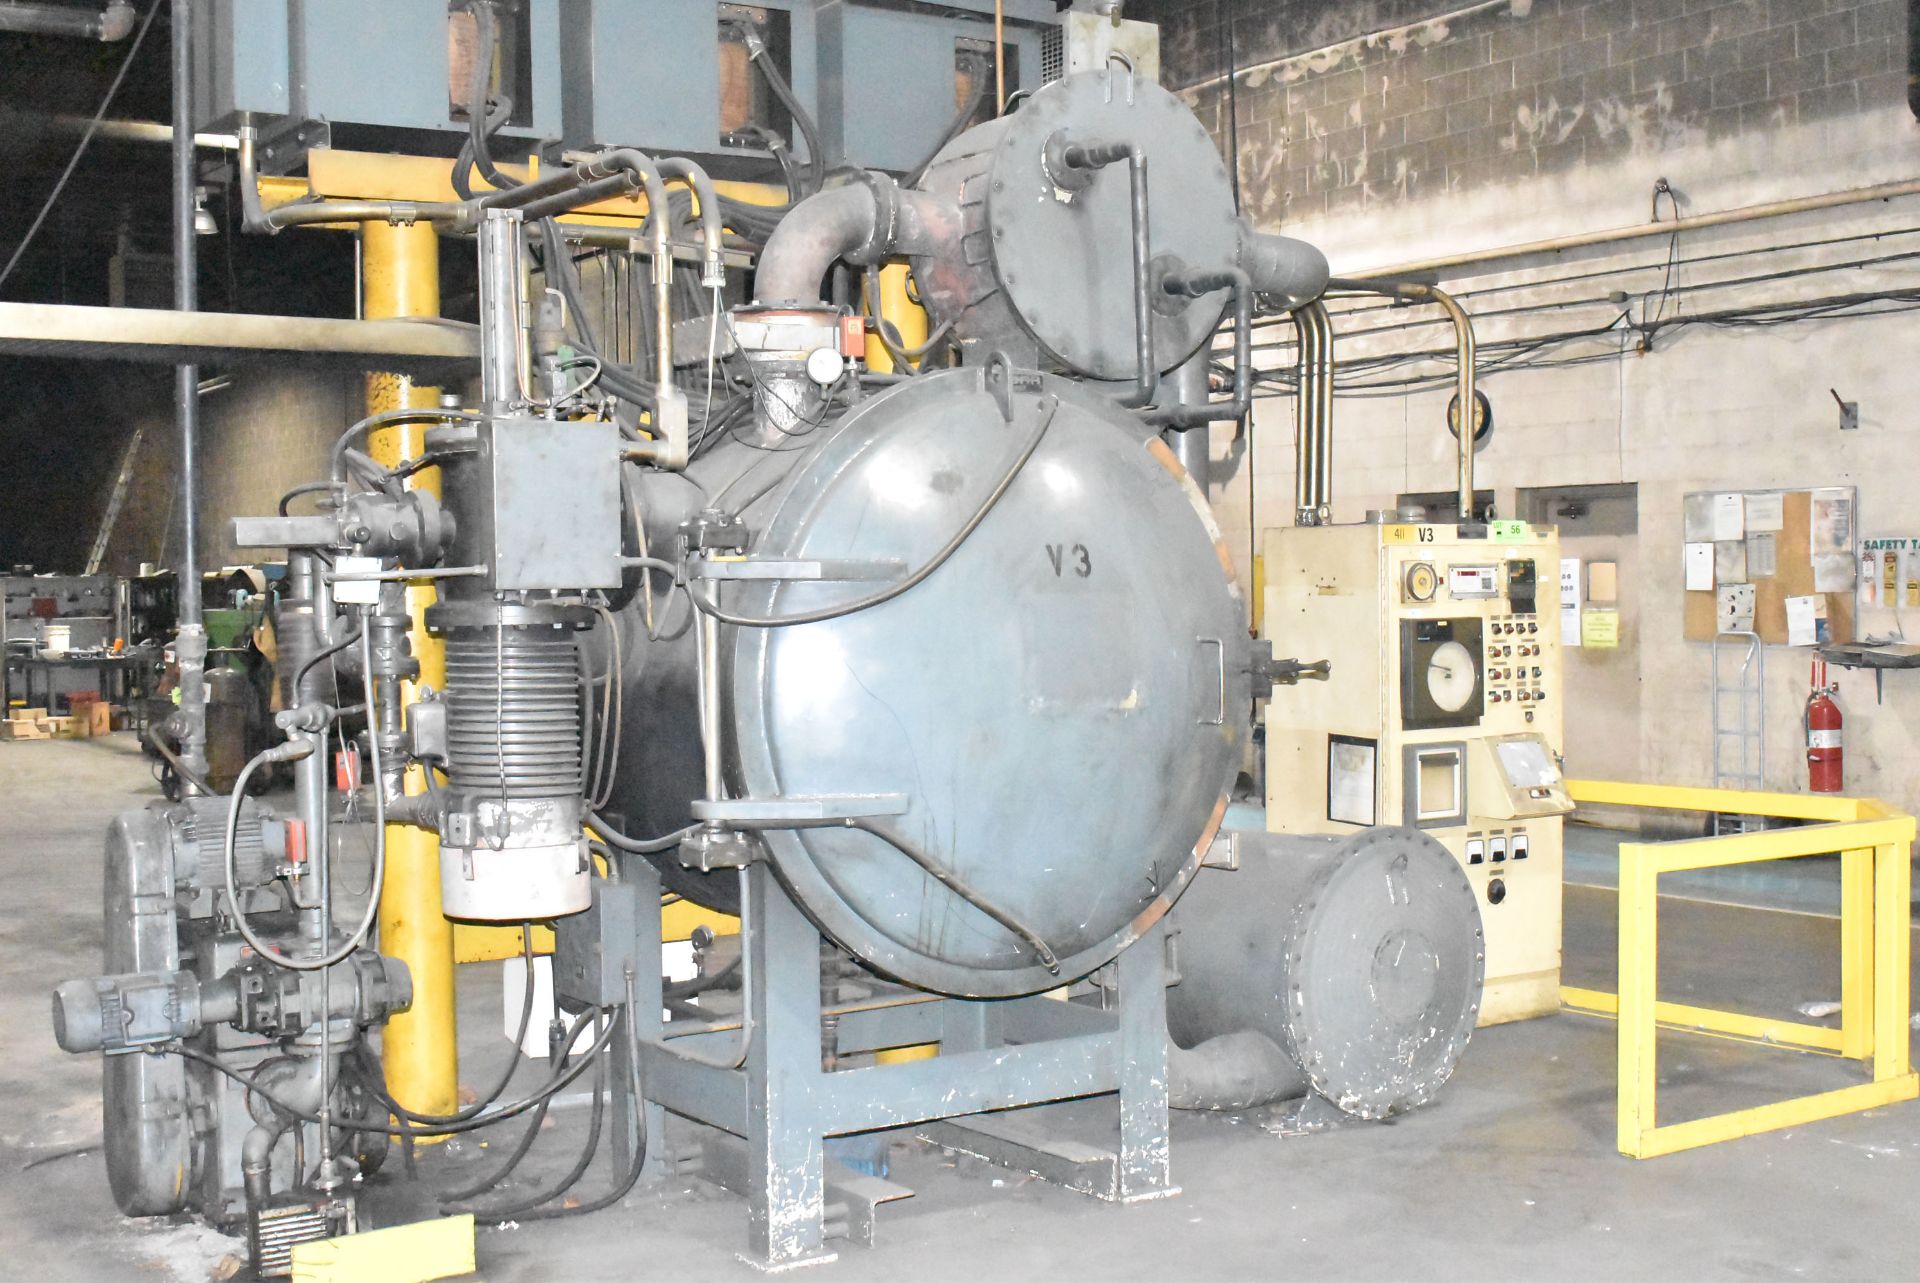 ABAR HR 34 ELECTRIC VACUUM FURNACE WITH 2400 DEGREES F MAX TEMP, 24"Wx24"Hx36"D APPROX SIZE, 1,000LB - Image 4 of 18